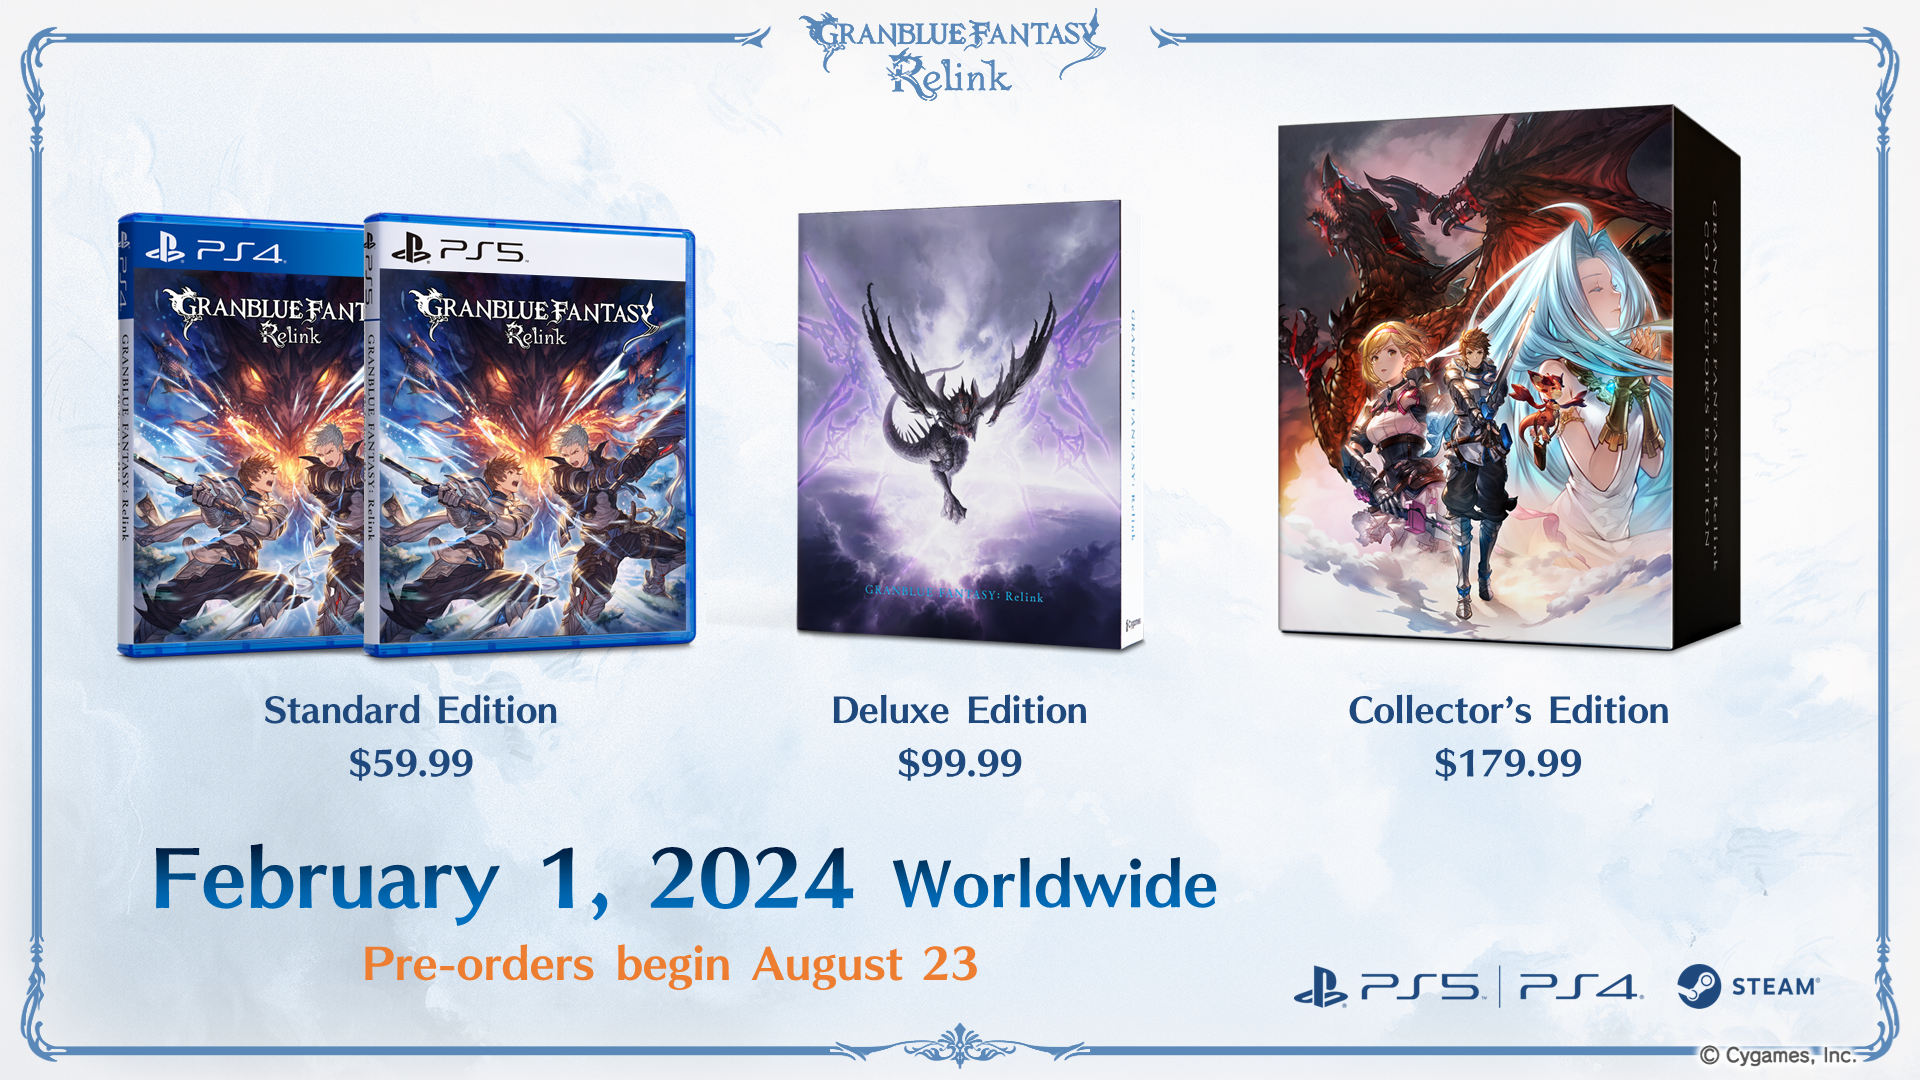 Granblue Fantasy: Relink launches on February 1, 2024 | RPG Site